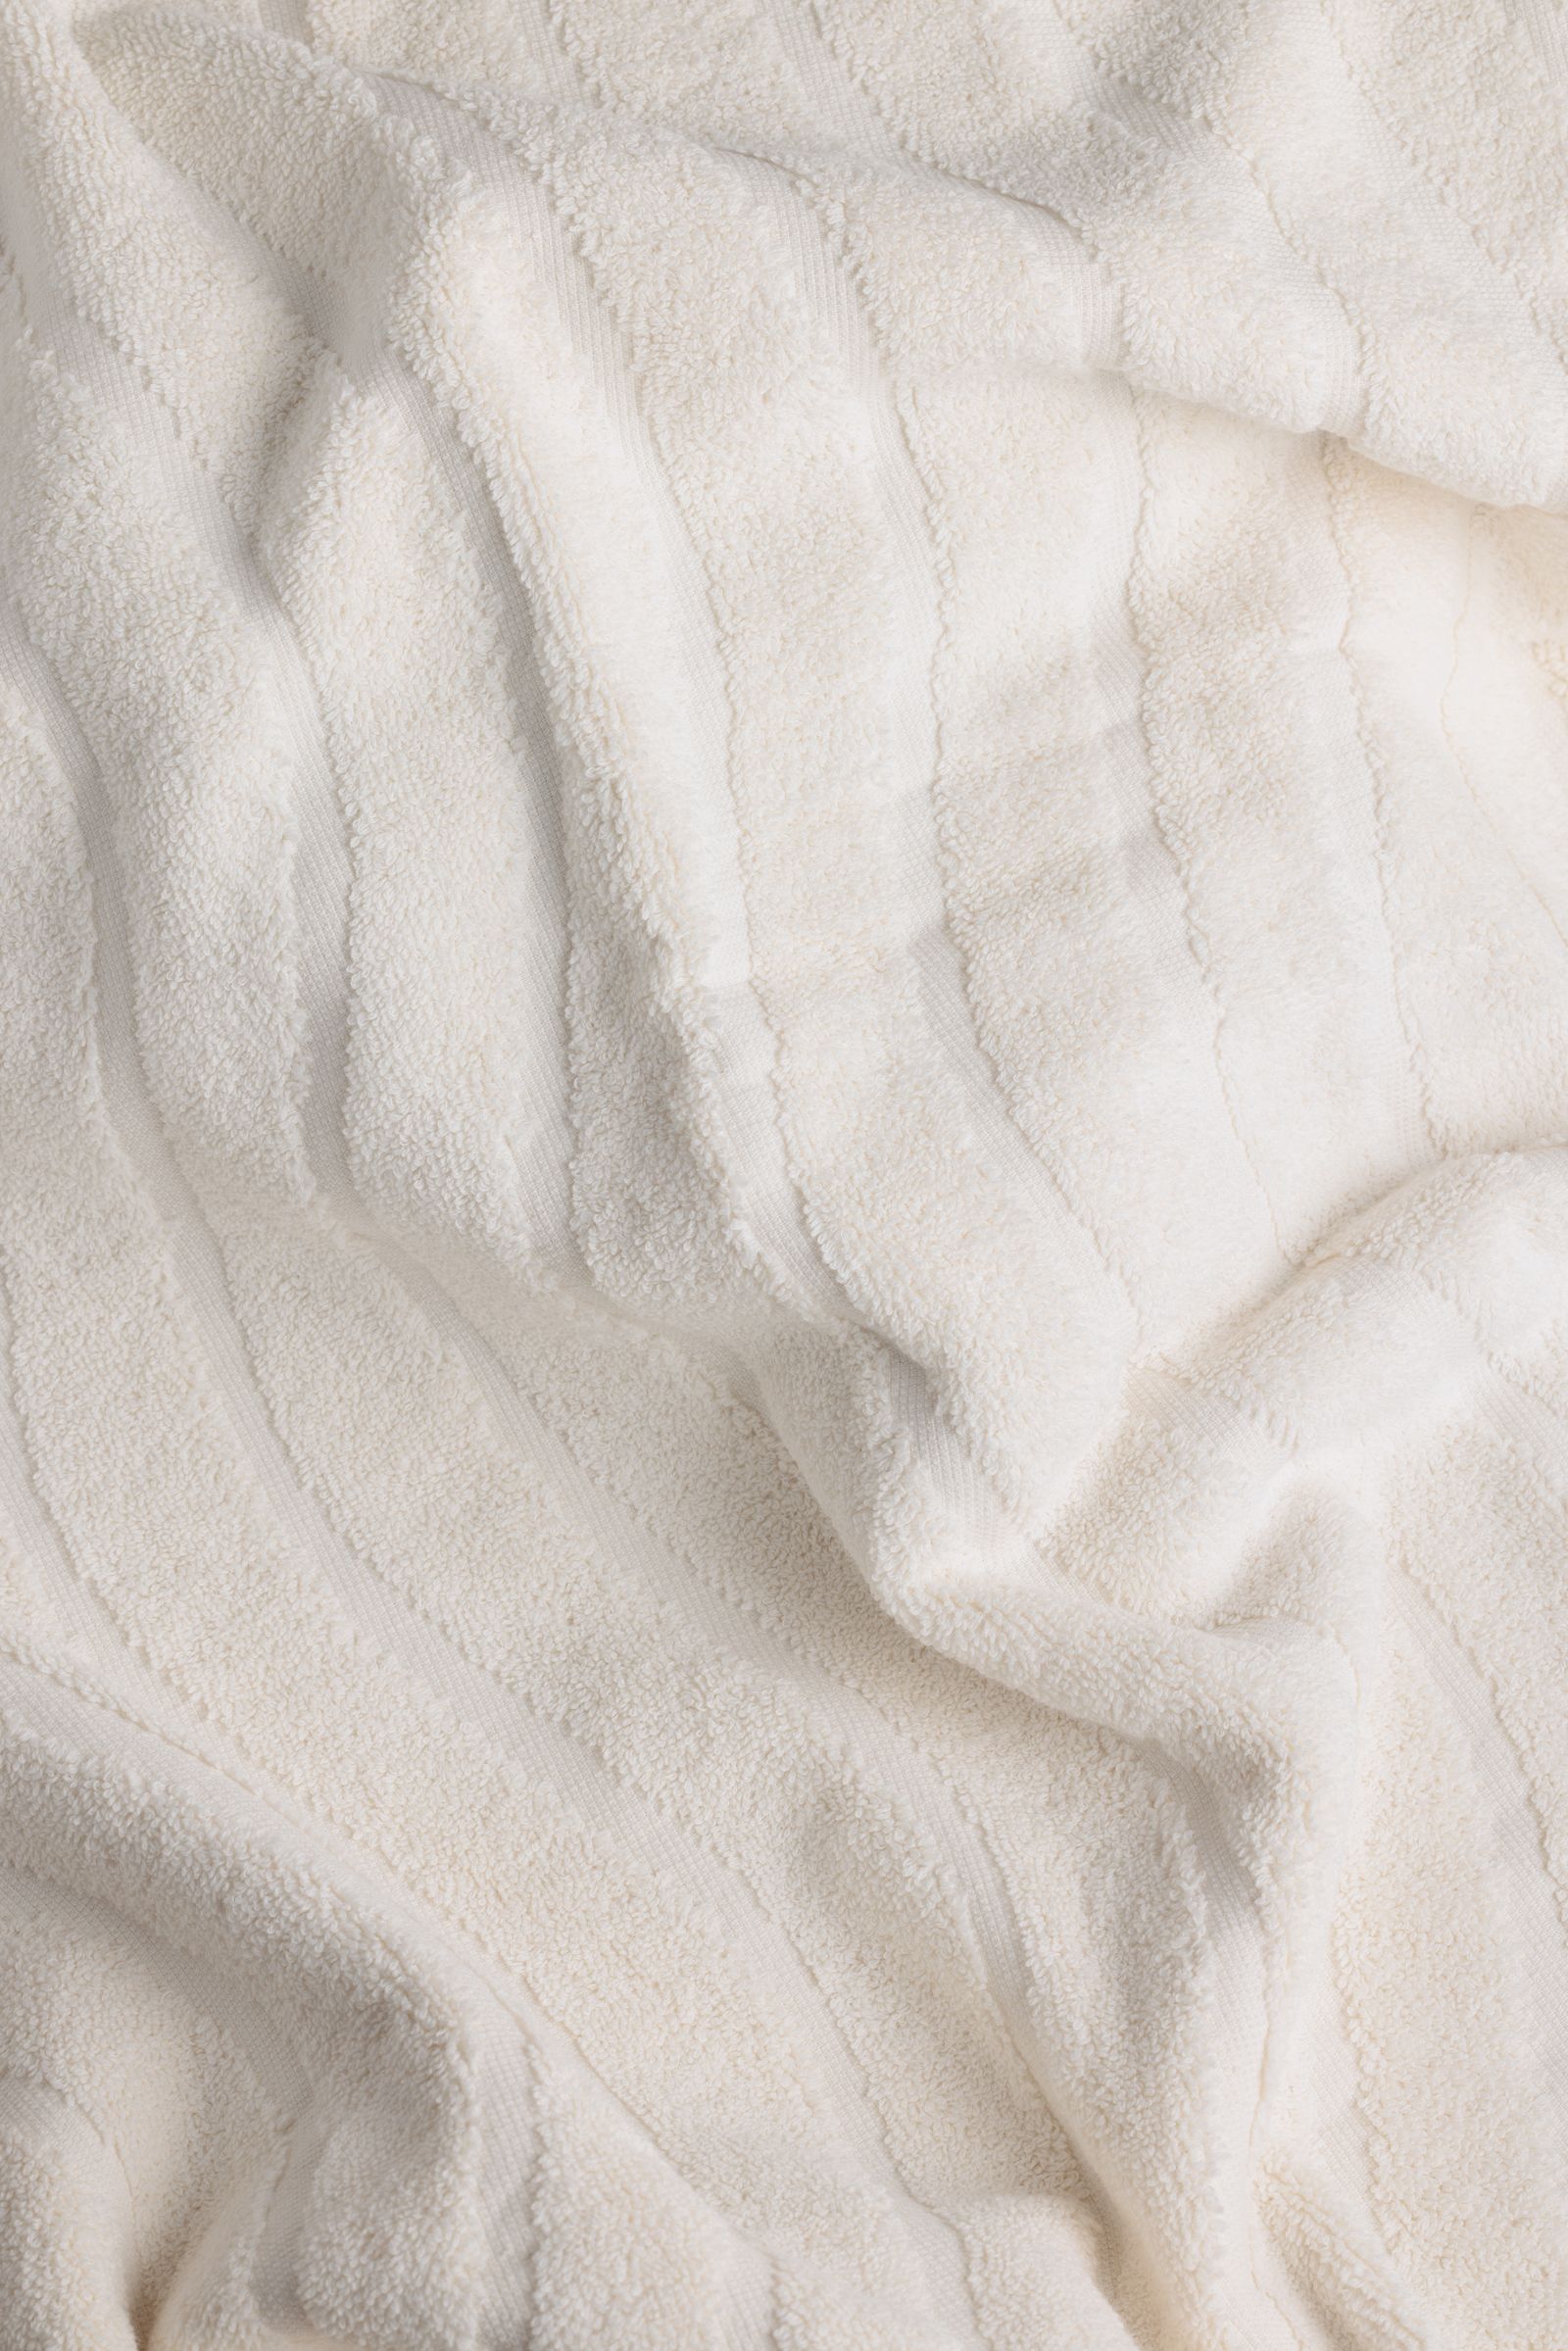 Shop BAINA | ST Ivory for Join Bath BAINA | off* Official Organic Cotton Towel 15% Online | | CLAIR Store ·